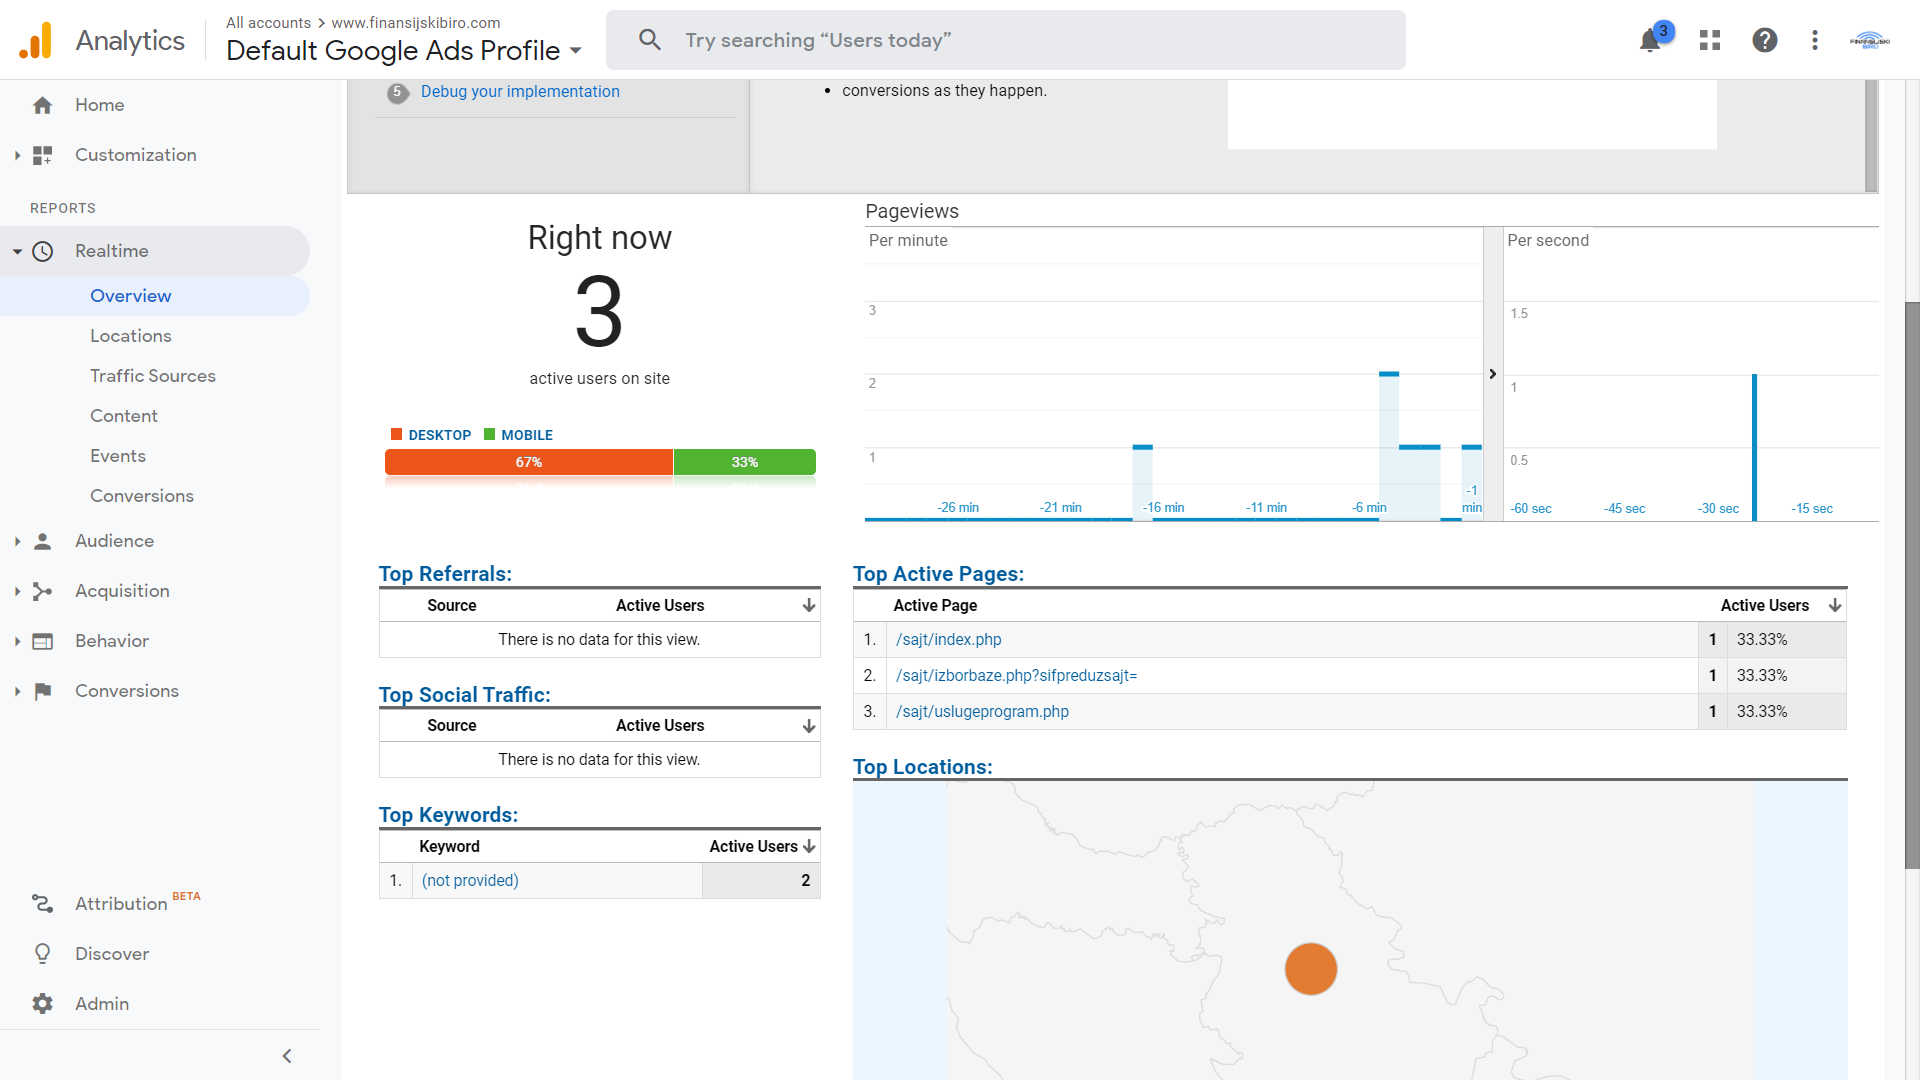 View the number of users on the site in real time via Google Analytics